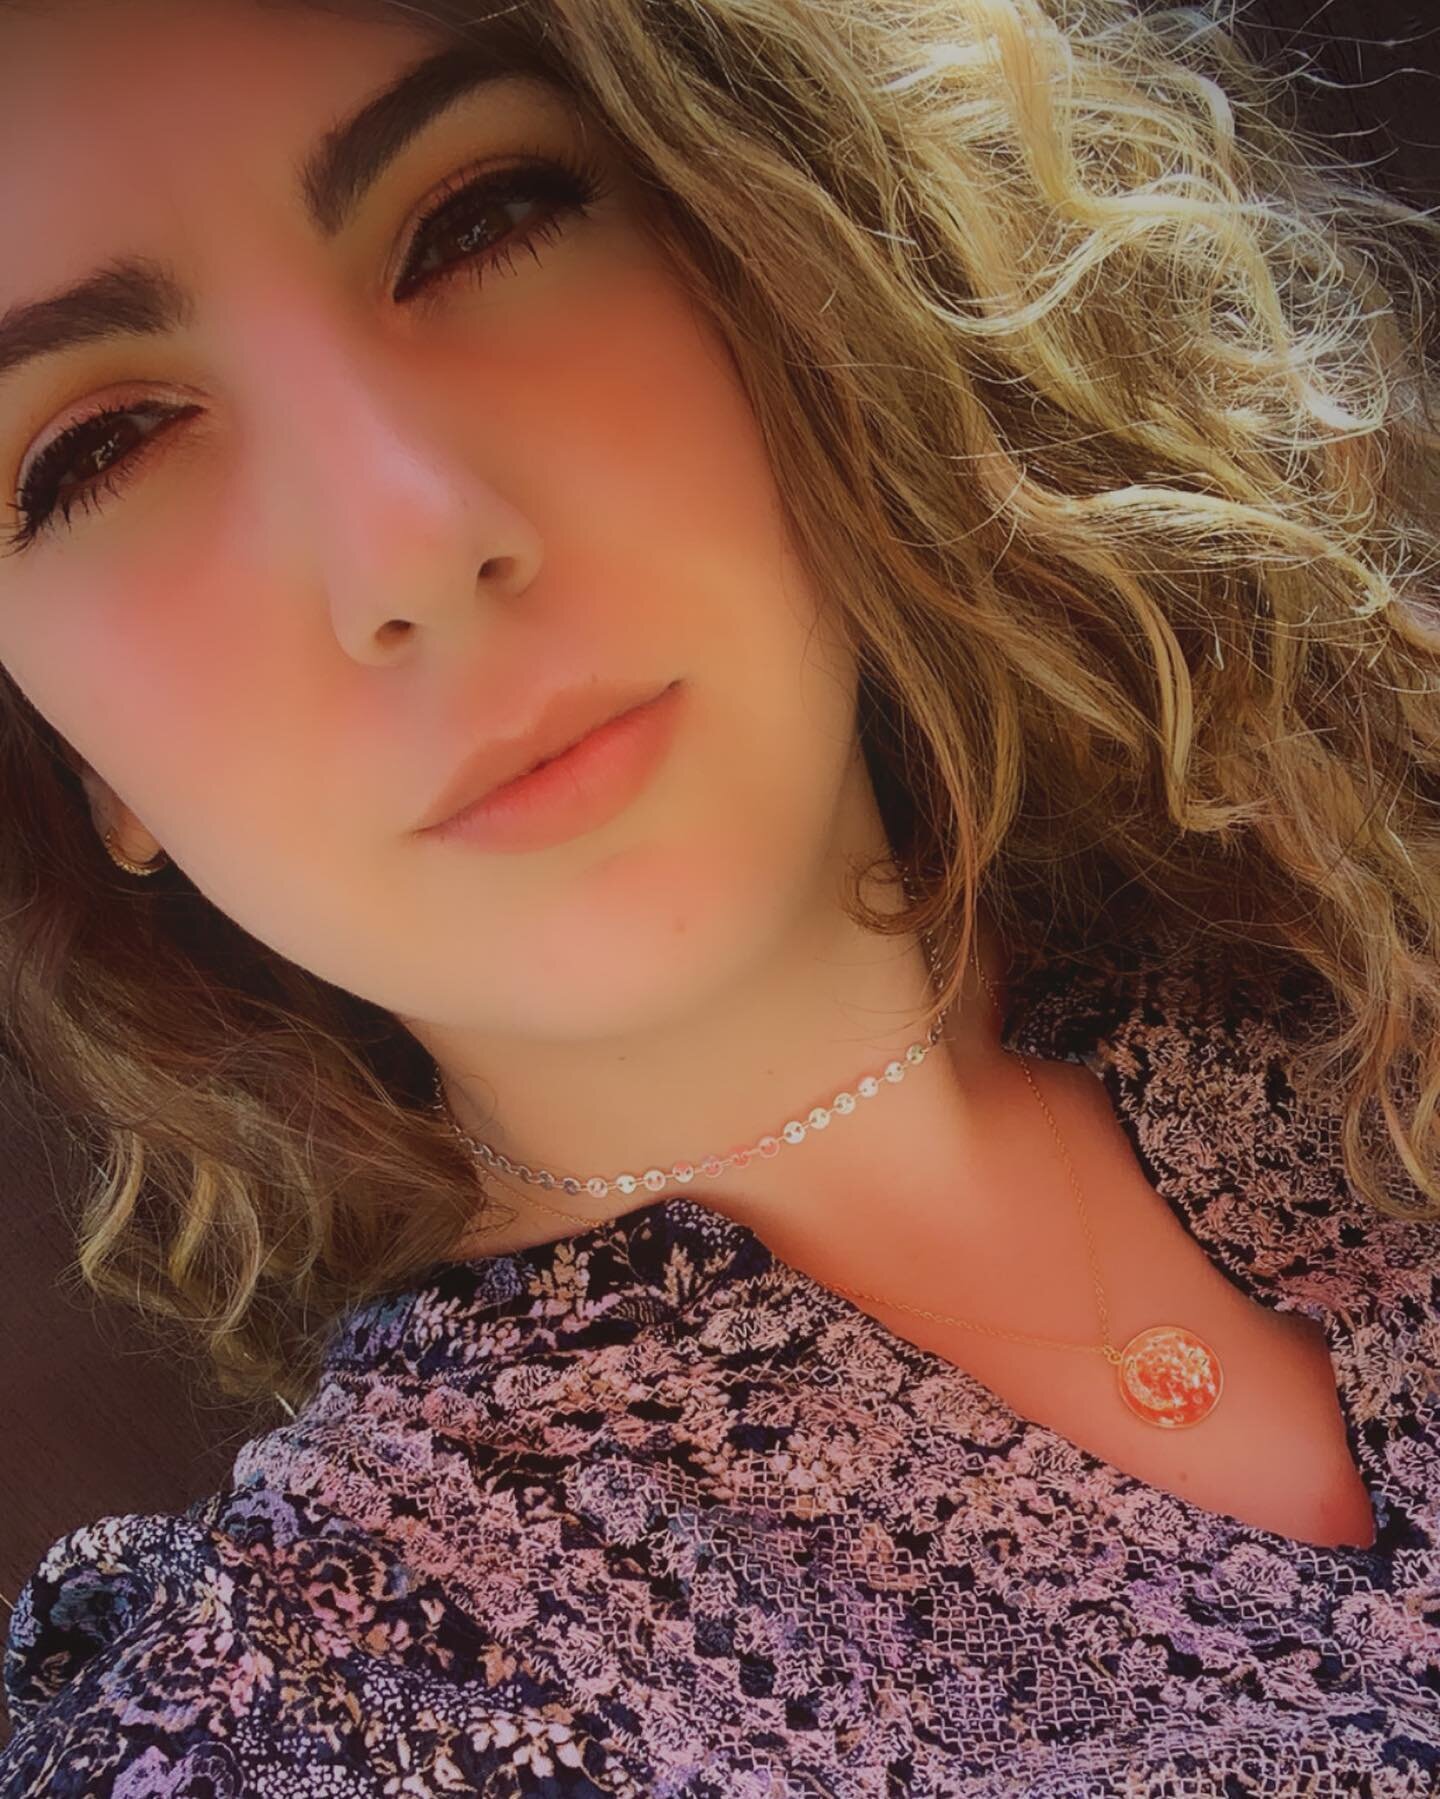 I love trying new things when it comes to jewelry and I&rsquo;m loving the look of mixed metals! Here I am wearing the Essential choker in Silver and the gold &ldquo;Love You to the Moon and Back&rdquo; necklace. How do you feel about mixed metal col